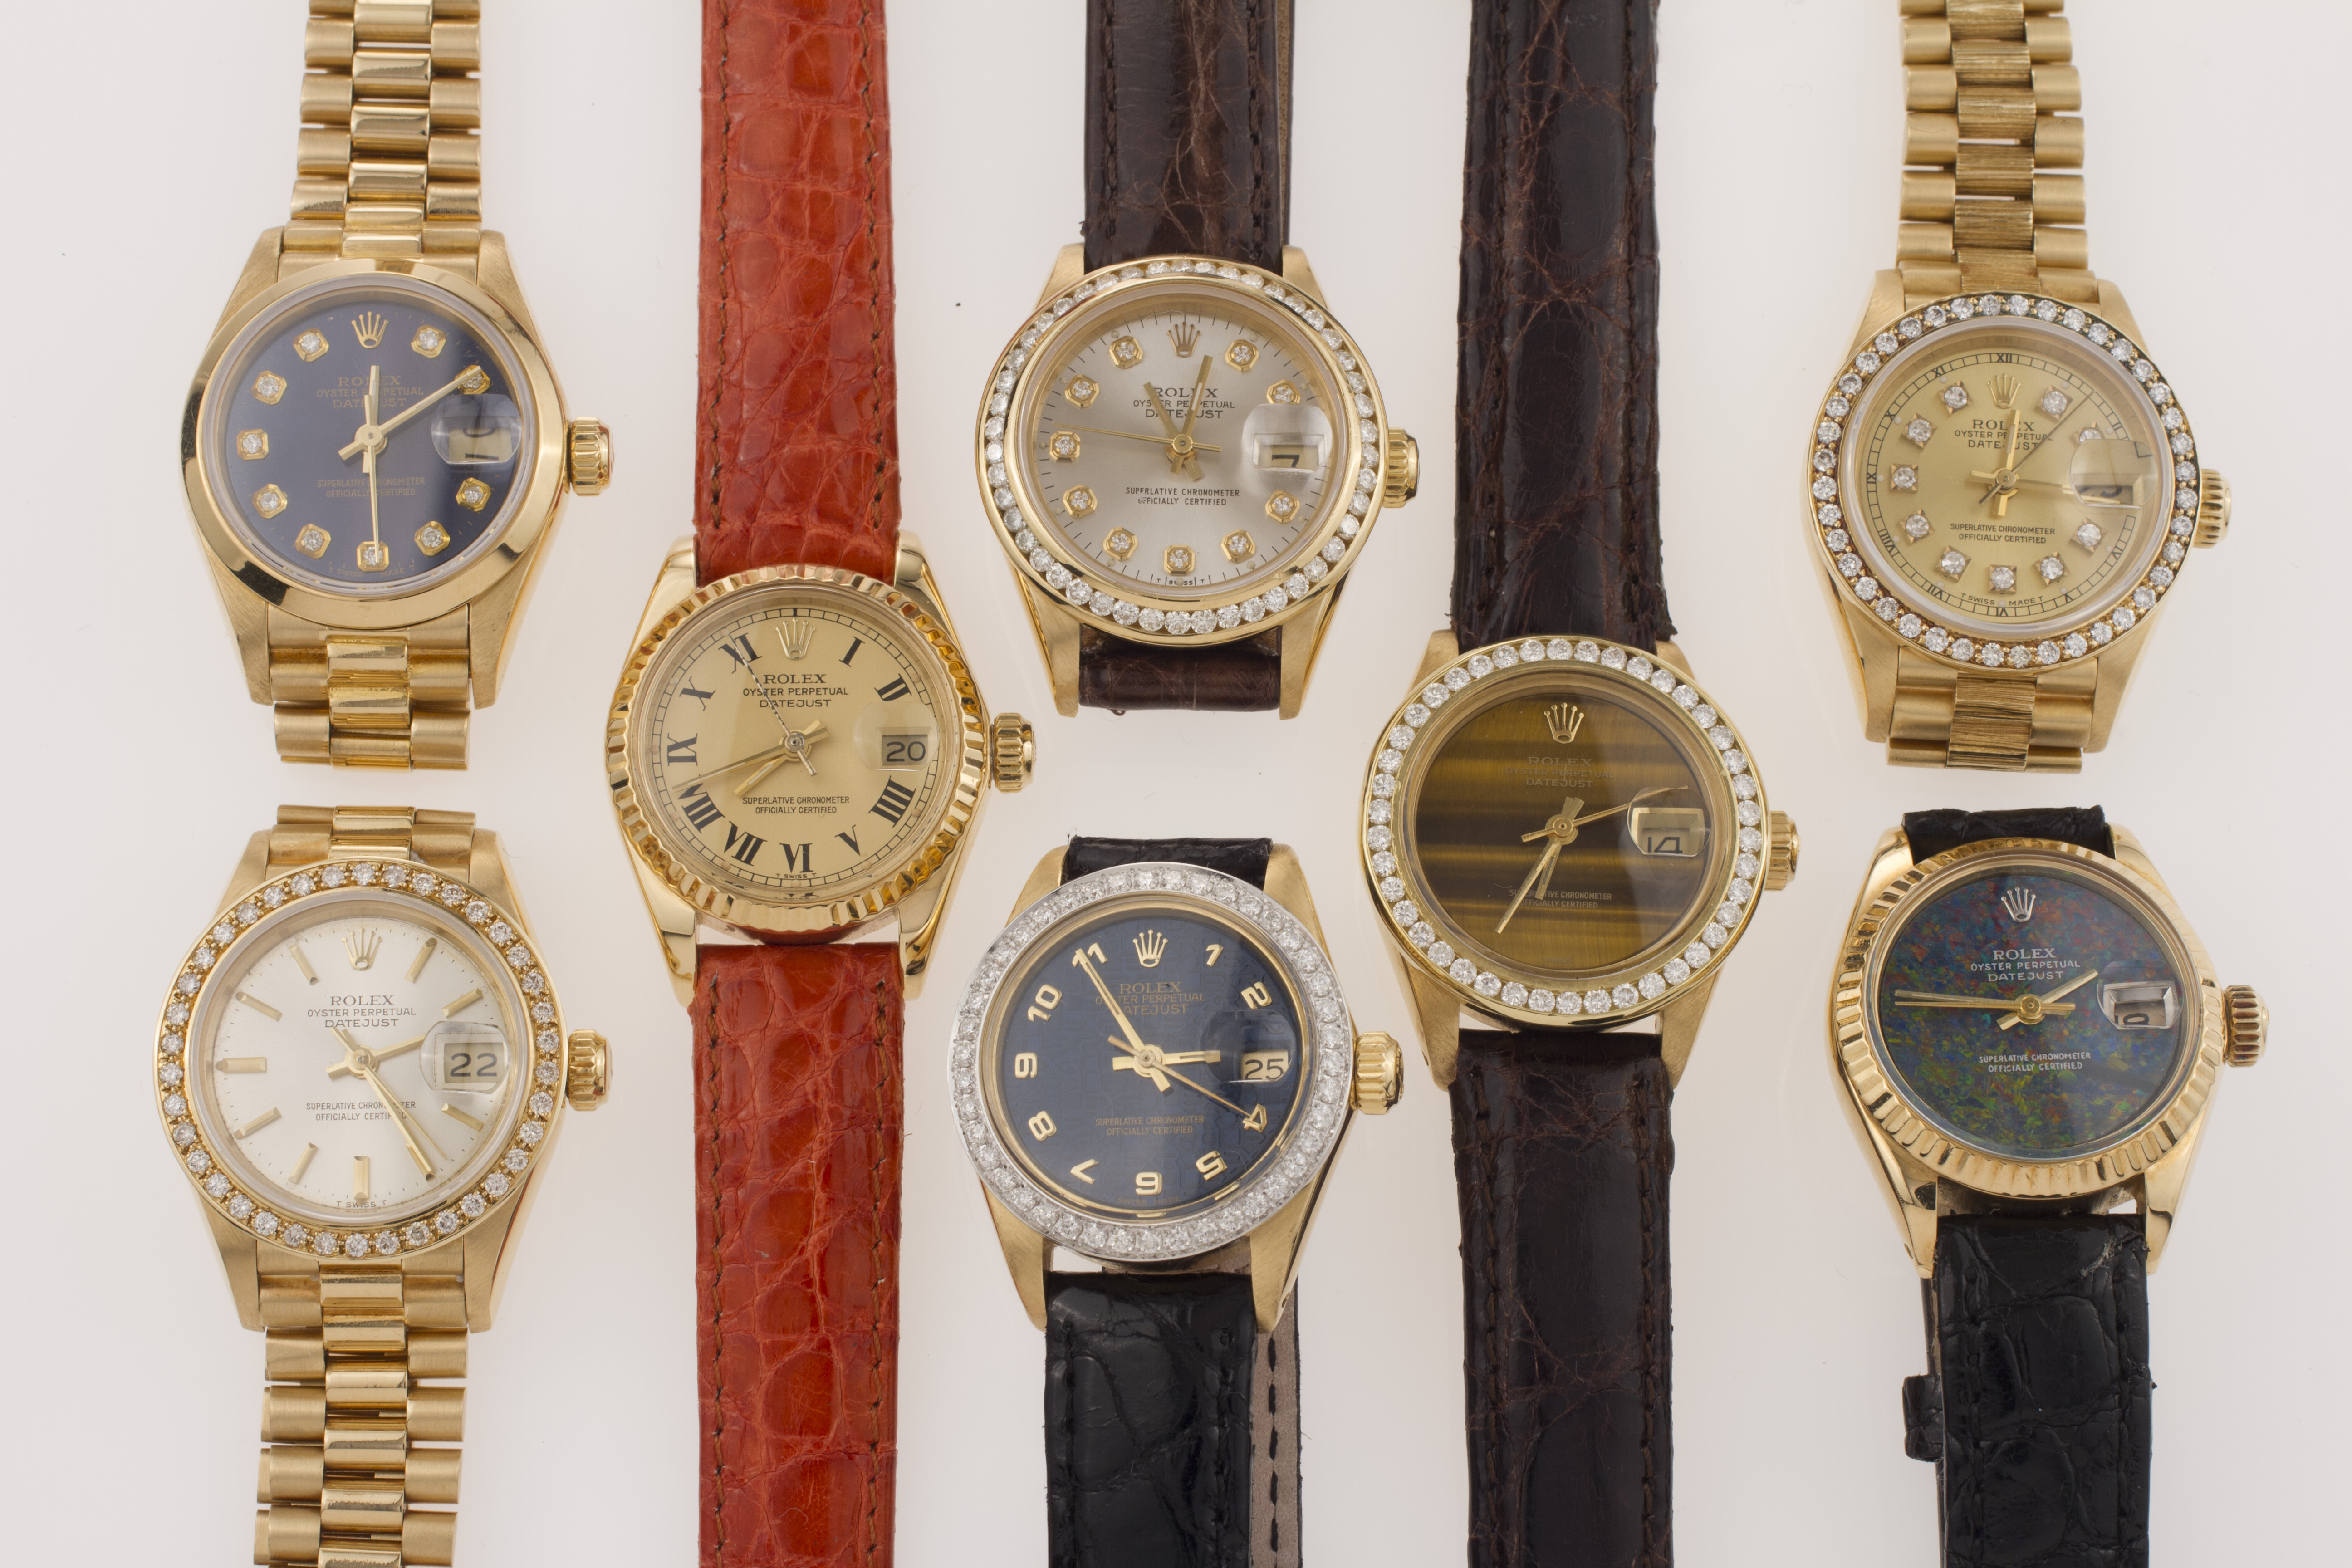 Customed Rolex Watches Bands, Bezels, and Dials